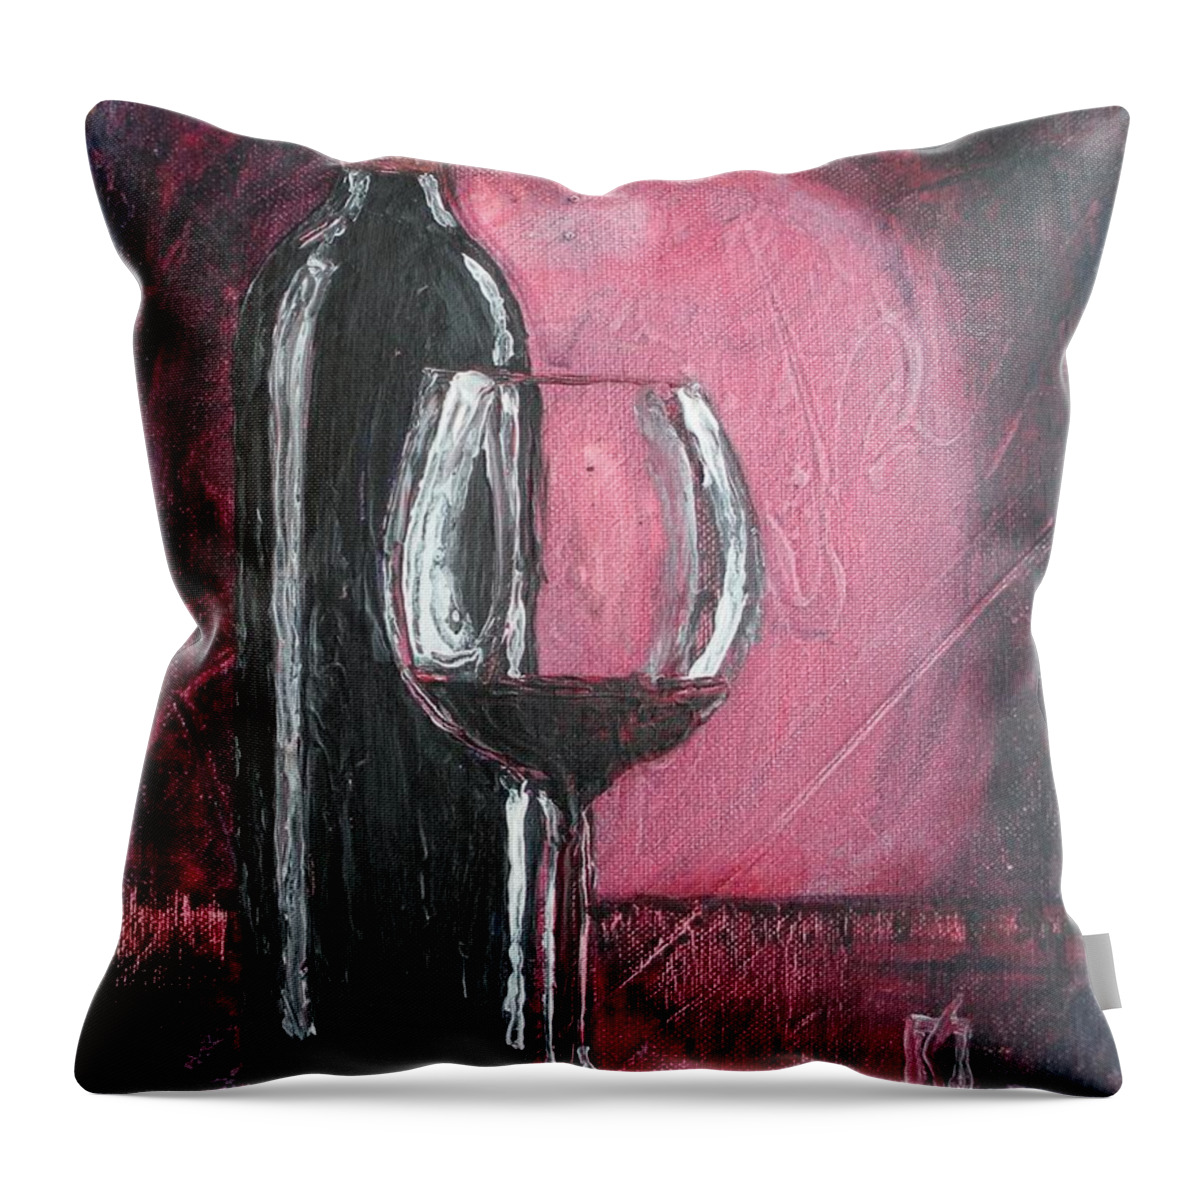 Wine Throw Pillow featuring the painting Drink by Lee Stockwell